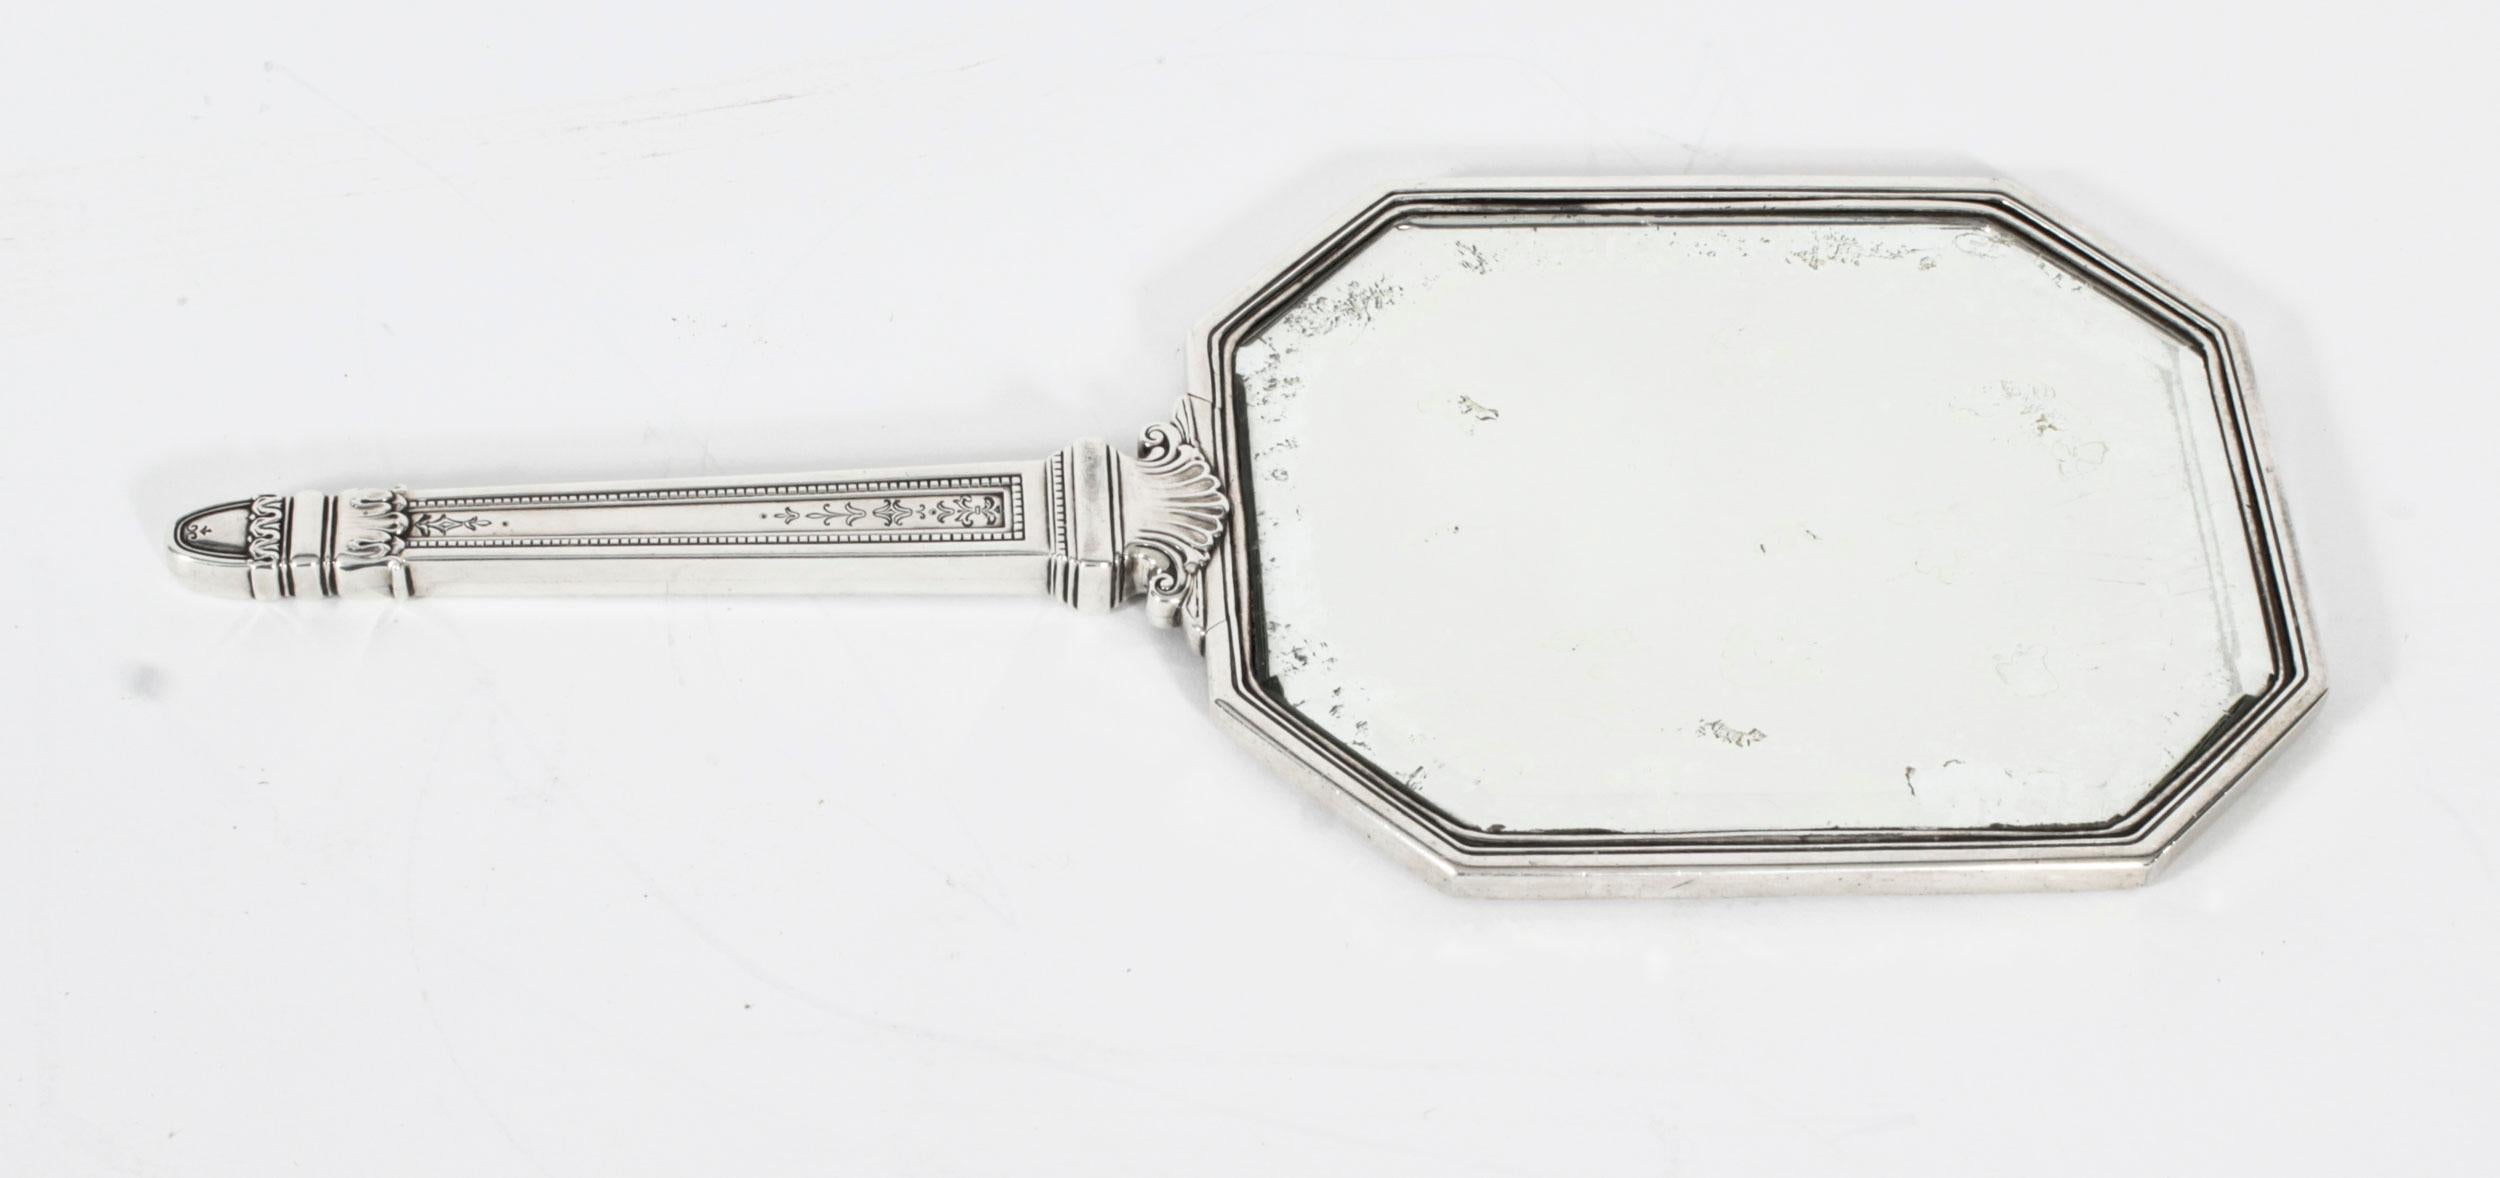 This is a wonderful antique Edwardian sterling silver hand-mirror with marks for 925 sterling silver, the maker's mark of the renowned silversmiths Tiffany & Co., and Circa 1900 in date.
 
The vanity mirror features heavy engraved and embossed